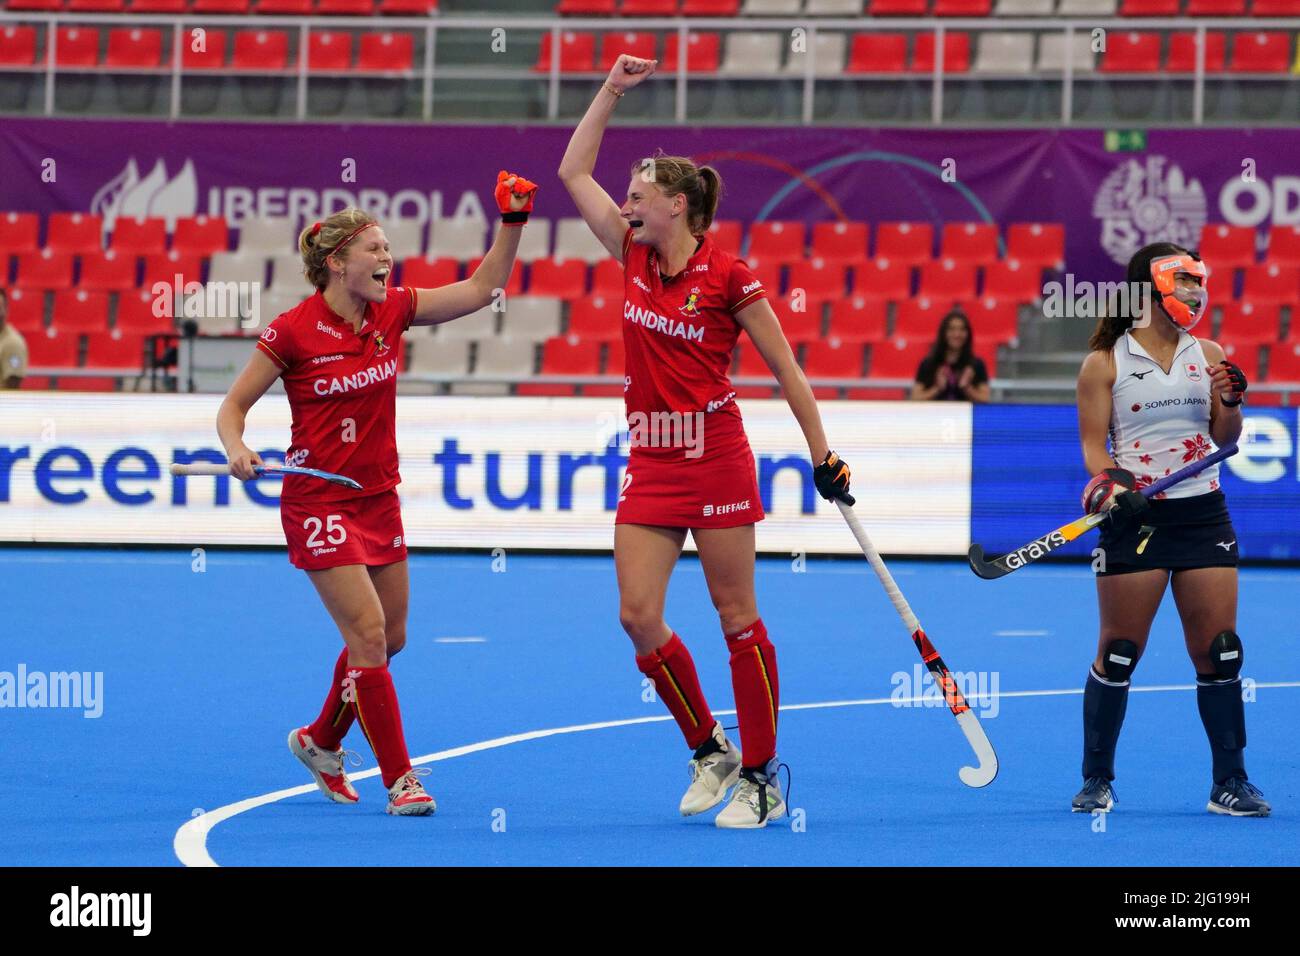 Belgium's Pauline Leclef and Belgium's Stephanie Vanden Borre celebrate after scoring during a hockey match between Belgian Red Panthers and Japan, Wednesday 06 July 2022 in Terrassa, Spain, game 3/3 in pool D of the group stage of the 2022 Women's FIH world cup.  BELGA PHOTO JOMA GARCIA Stock Photo